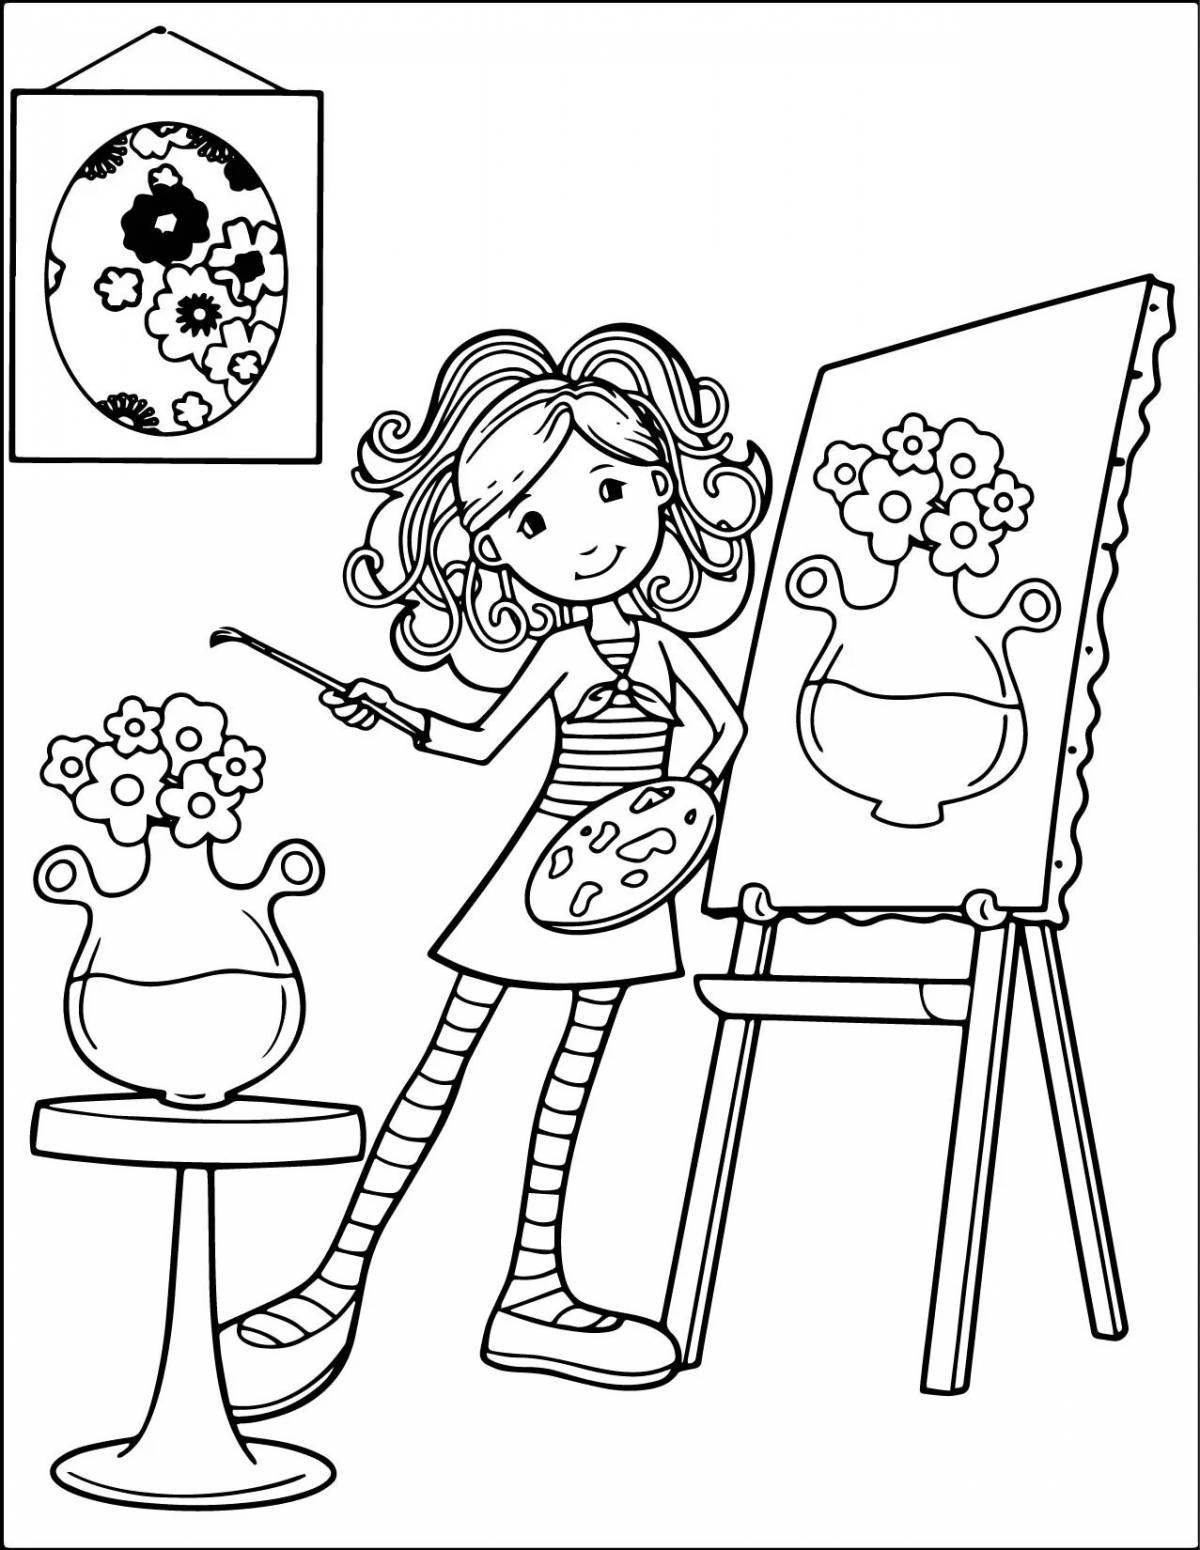 Fancy coloring book for toddlers